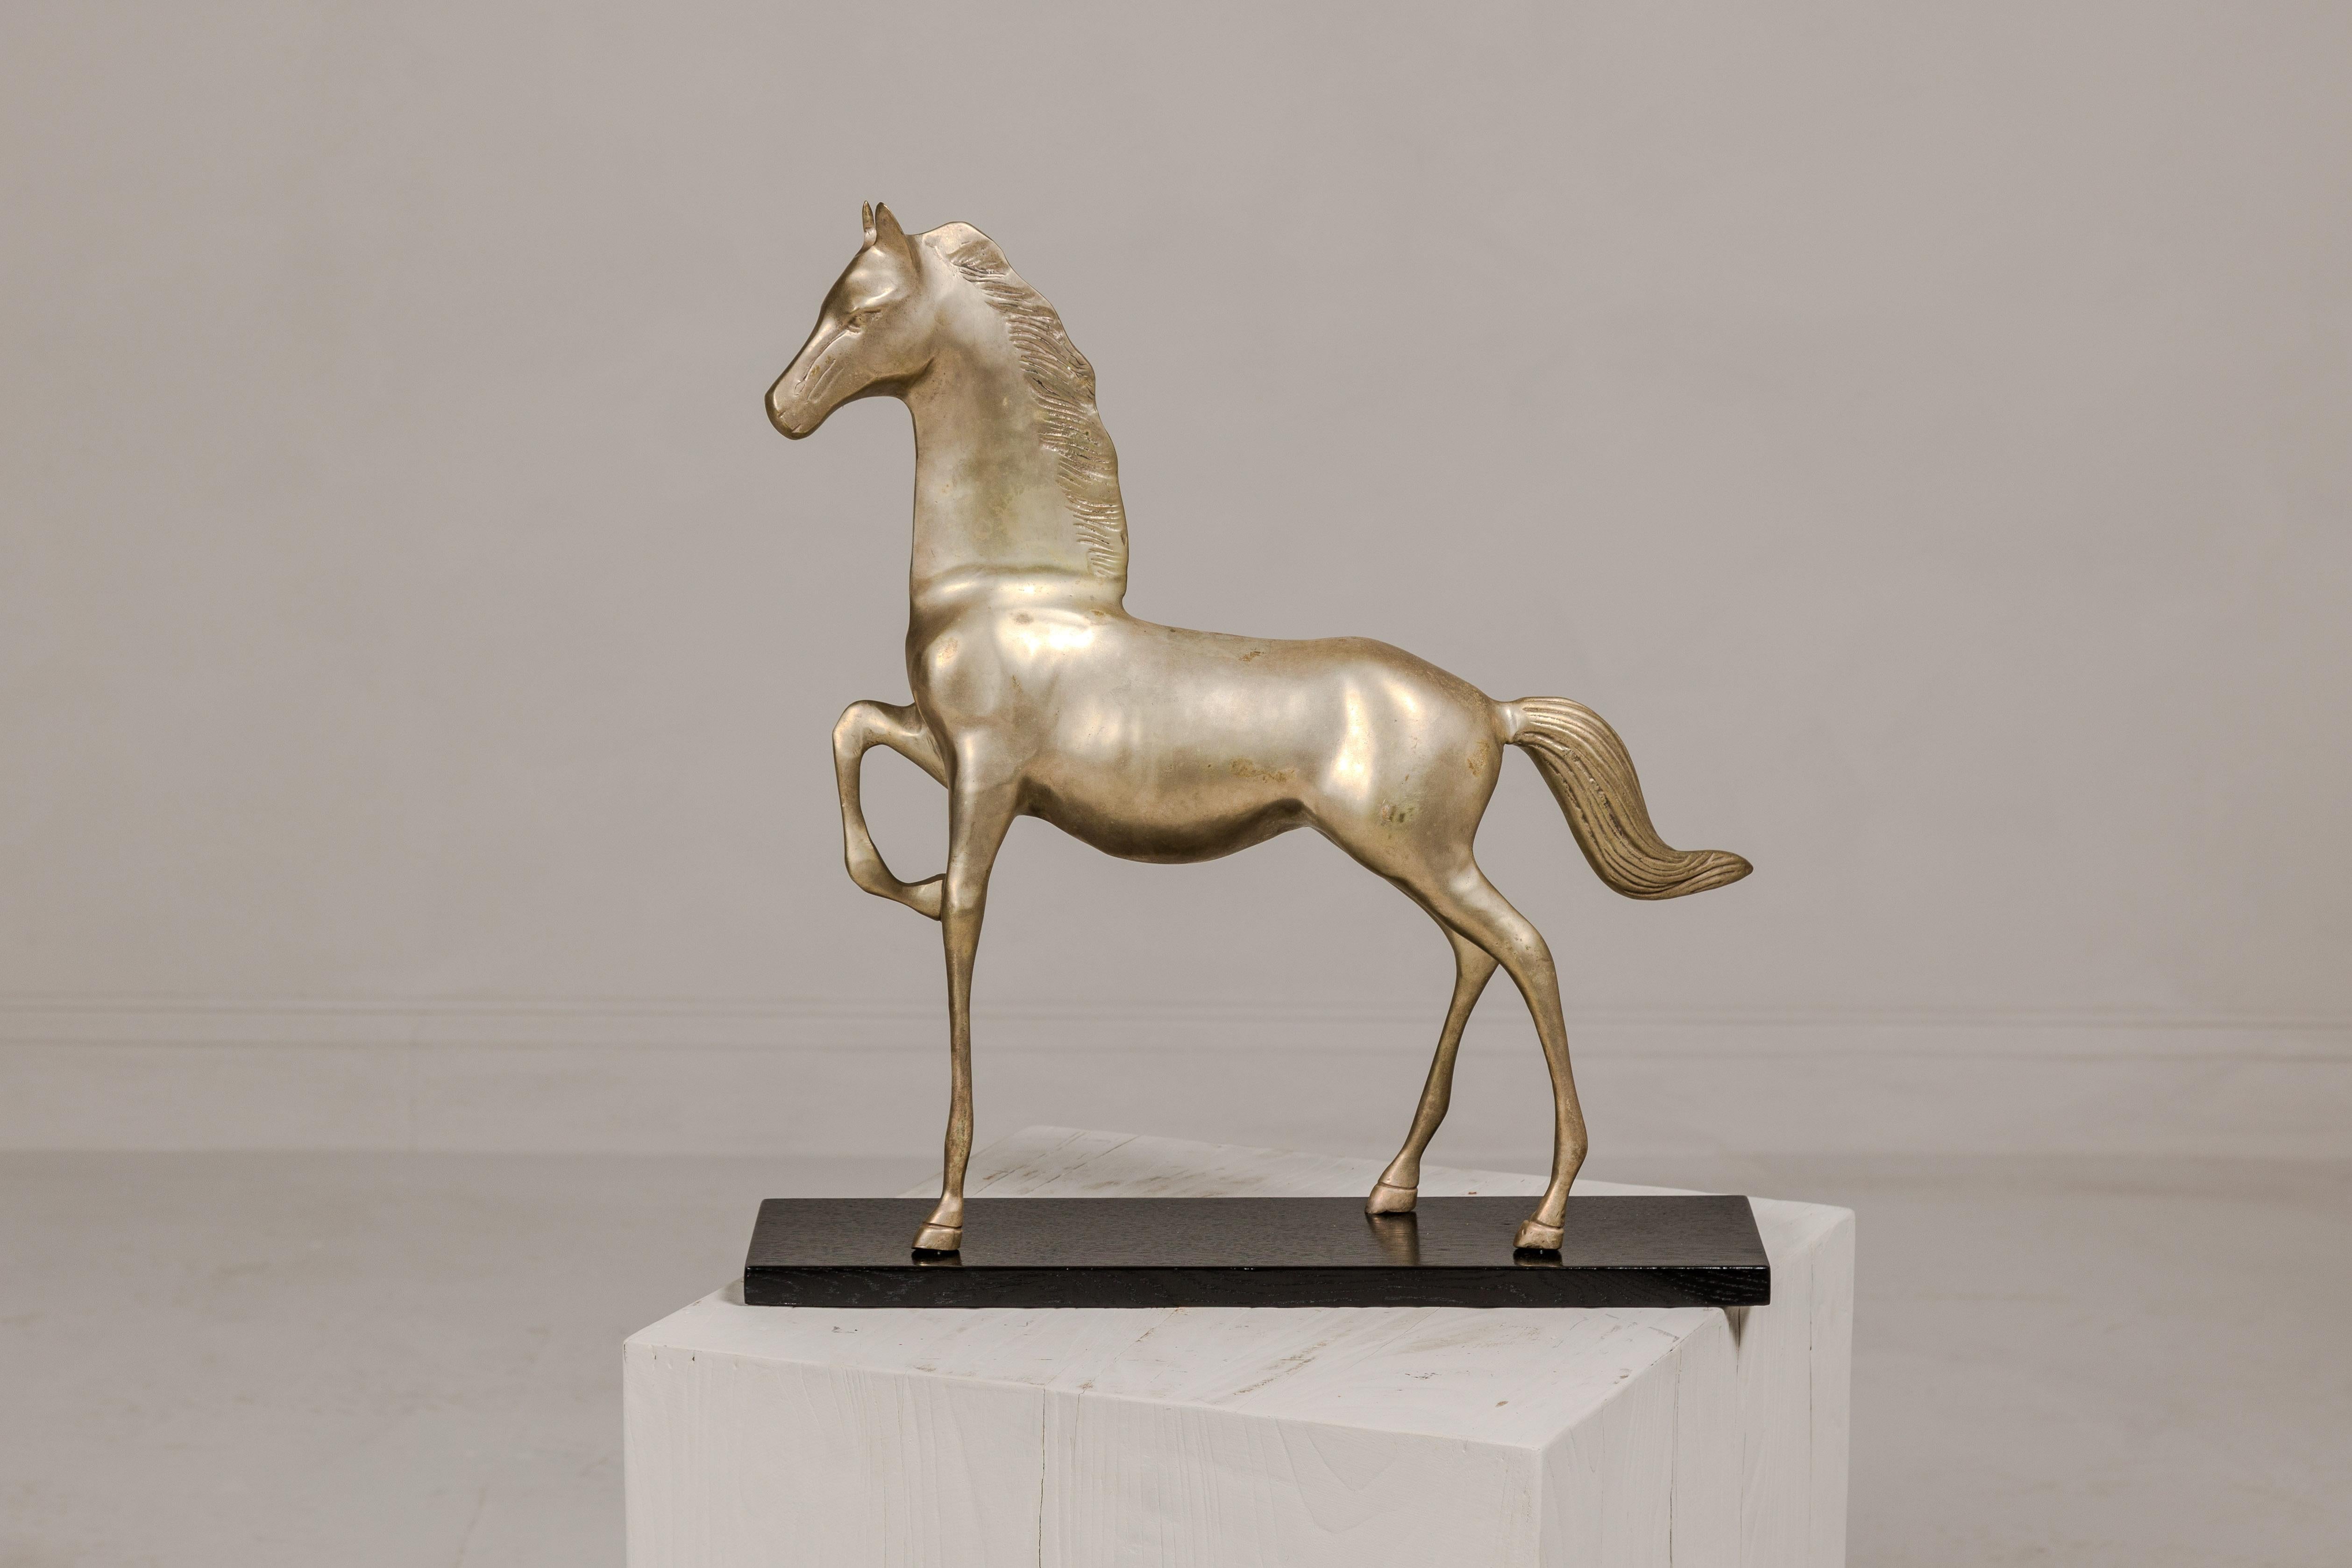 This vintage silver over brass walking horse statuette is an exquisite representation of equine grace and beauty, poised elegantly on an ebonized oak base. The statuette captures the majestic stride of the horse, with its right front leg raised in a